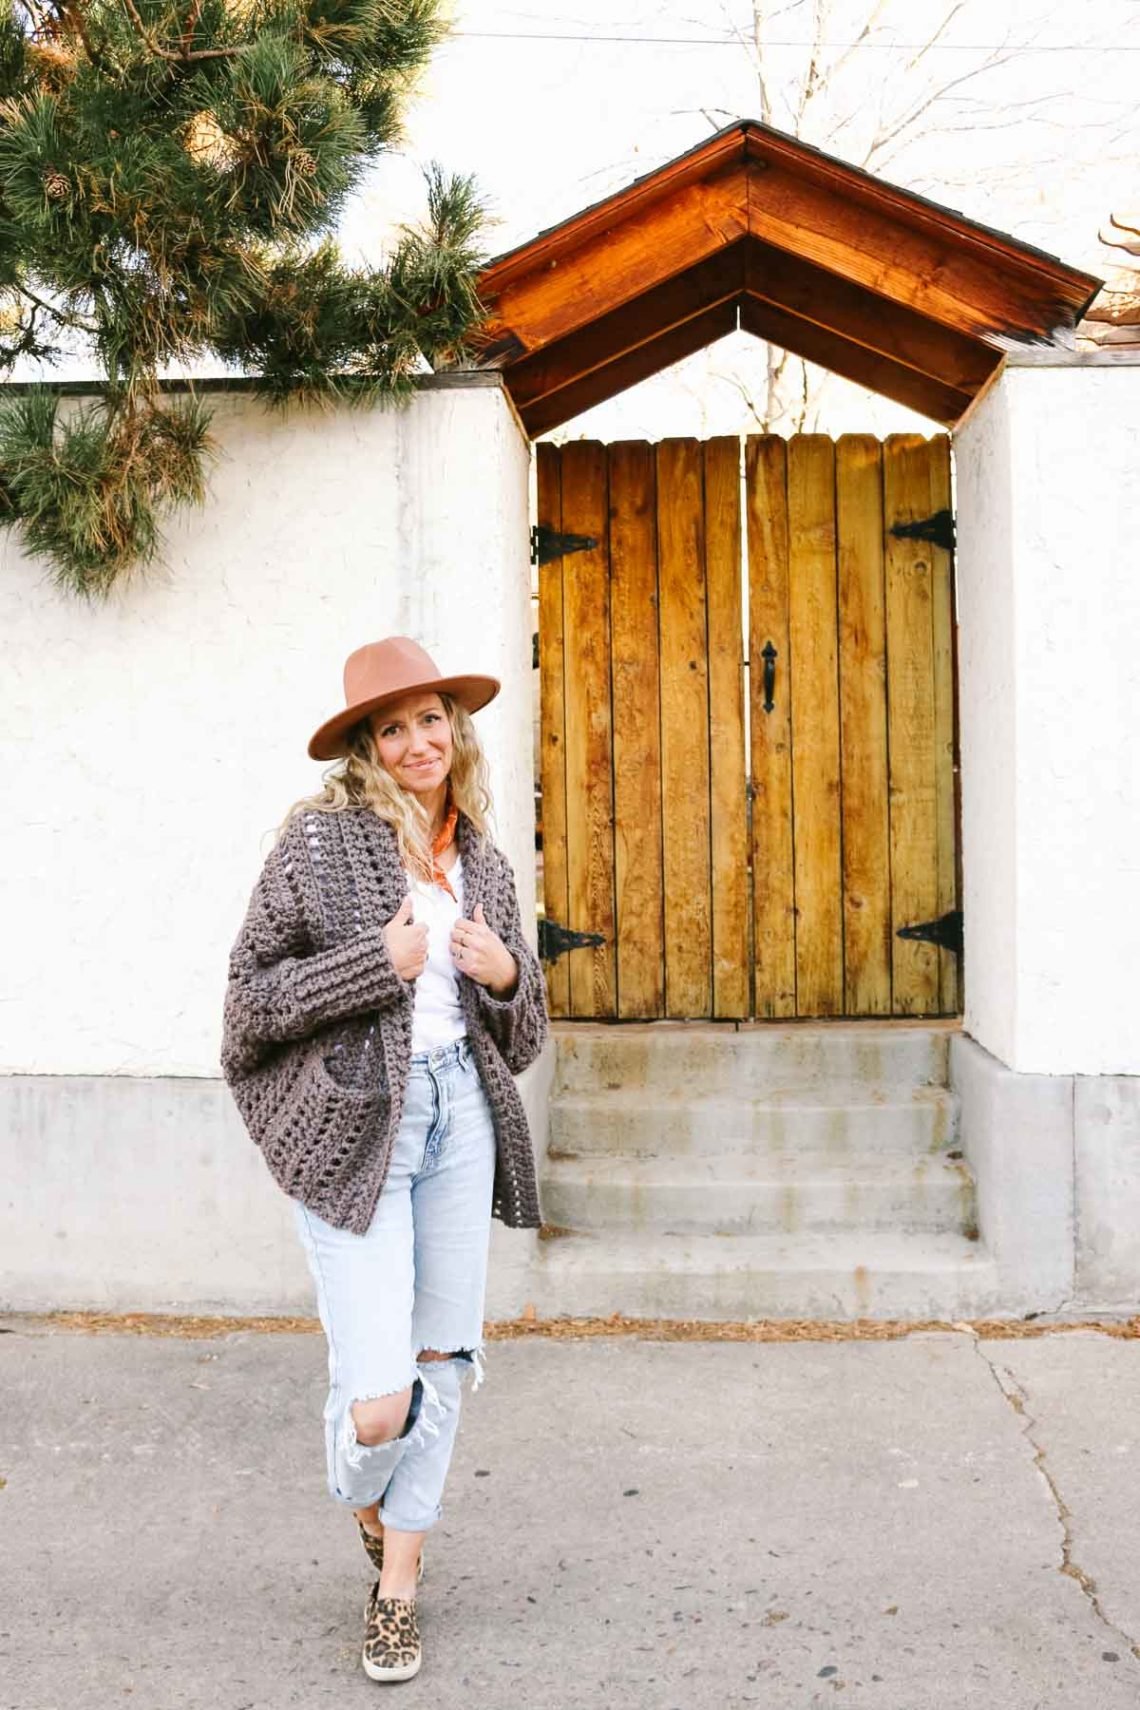 This image shows a blonde woman standing in front of a gate and a white wall. She is wearing a brownish grayish crochet cardigan with pockets, light blue jeans, a white shirt and a tan hat. Her hands are in her pockets and she is looking at the camera.